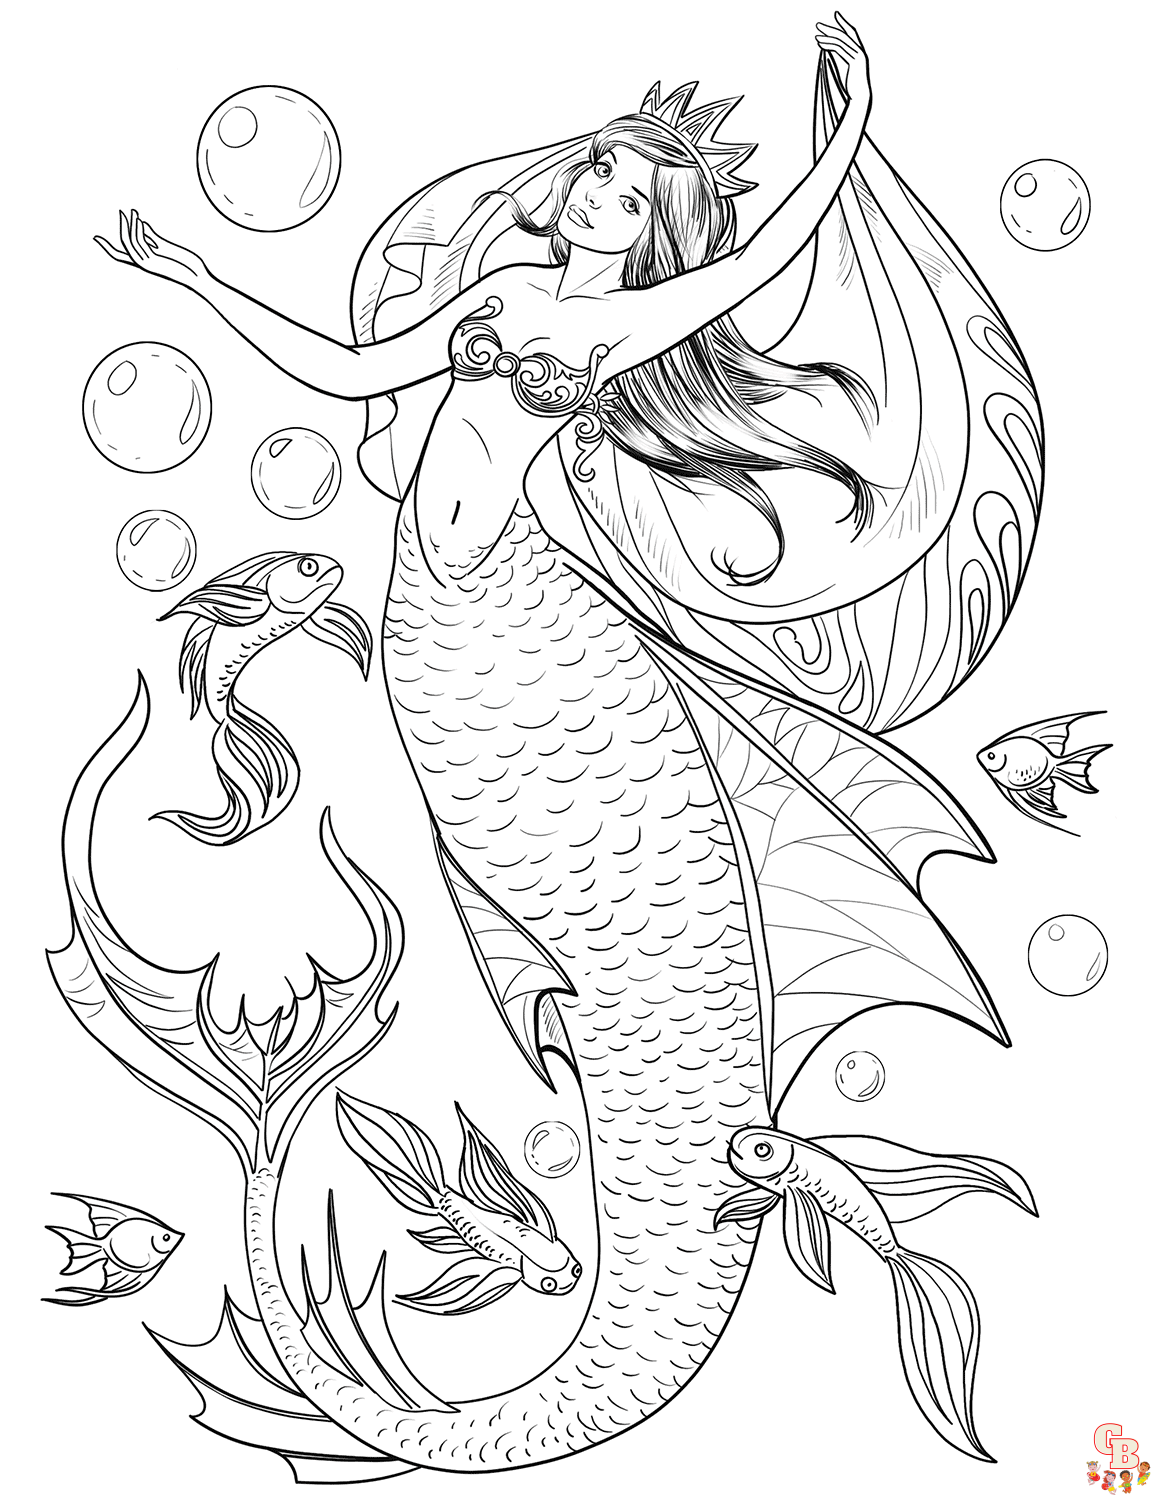 Free art print of Tattoo art, sketch of a mermaid, pisces vintage style |  FreeArt | fa9154263